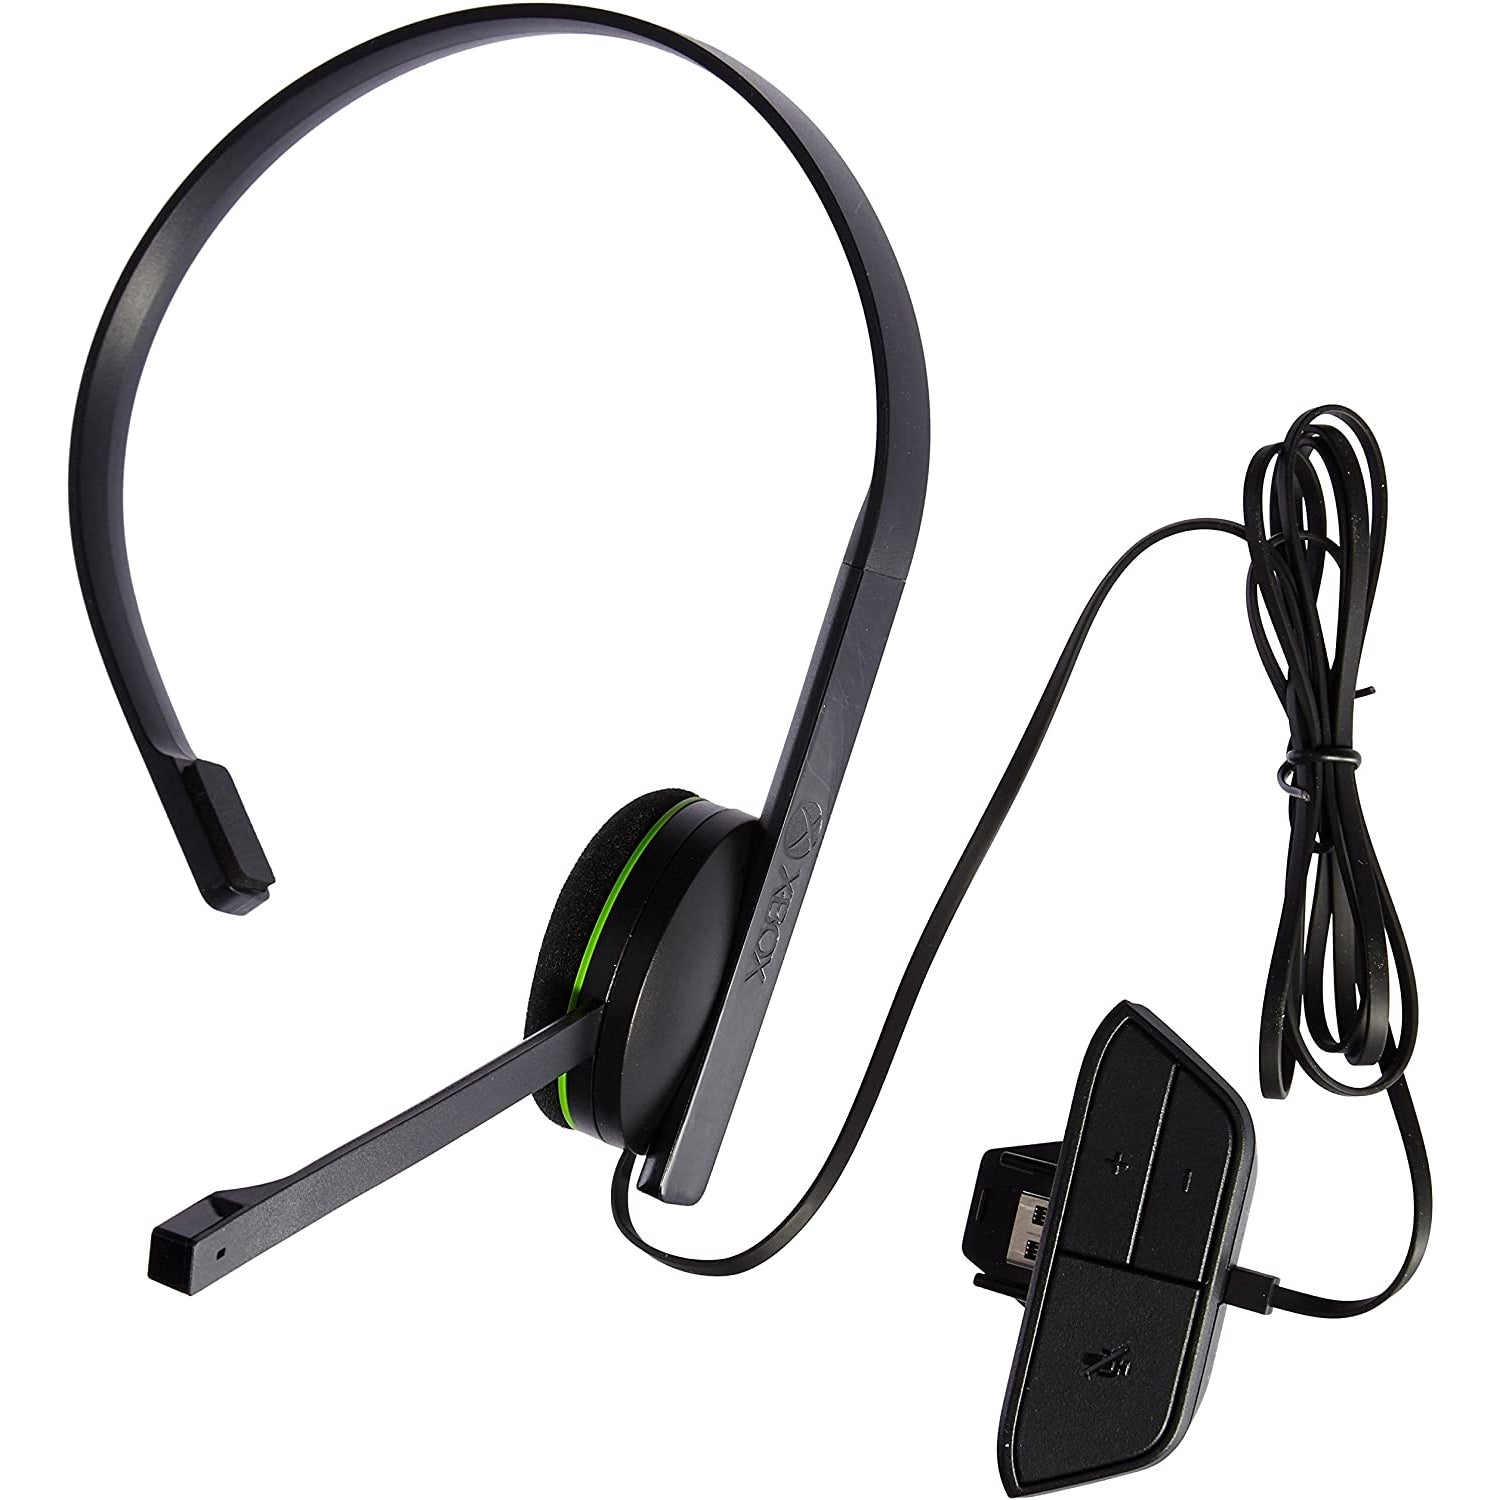 Official Xbox Chat Headset for Xbox One S, Xbox Series S, Xbox Series X - New